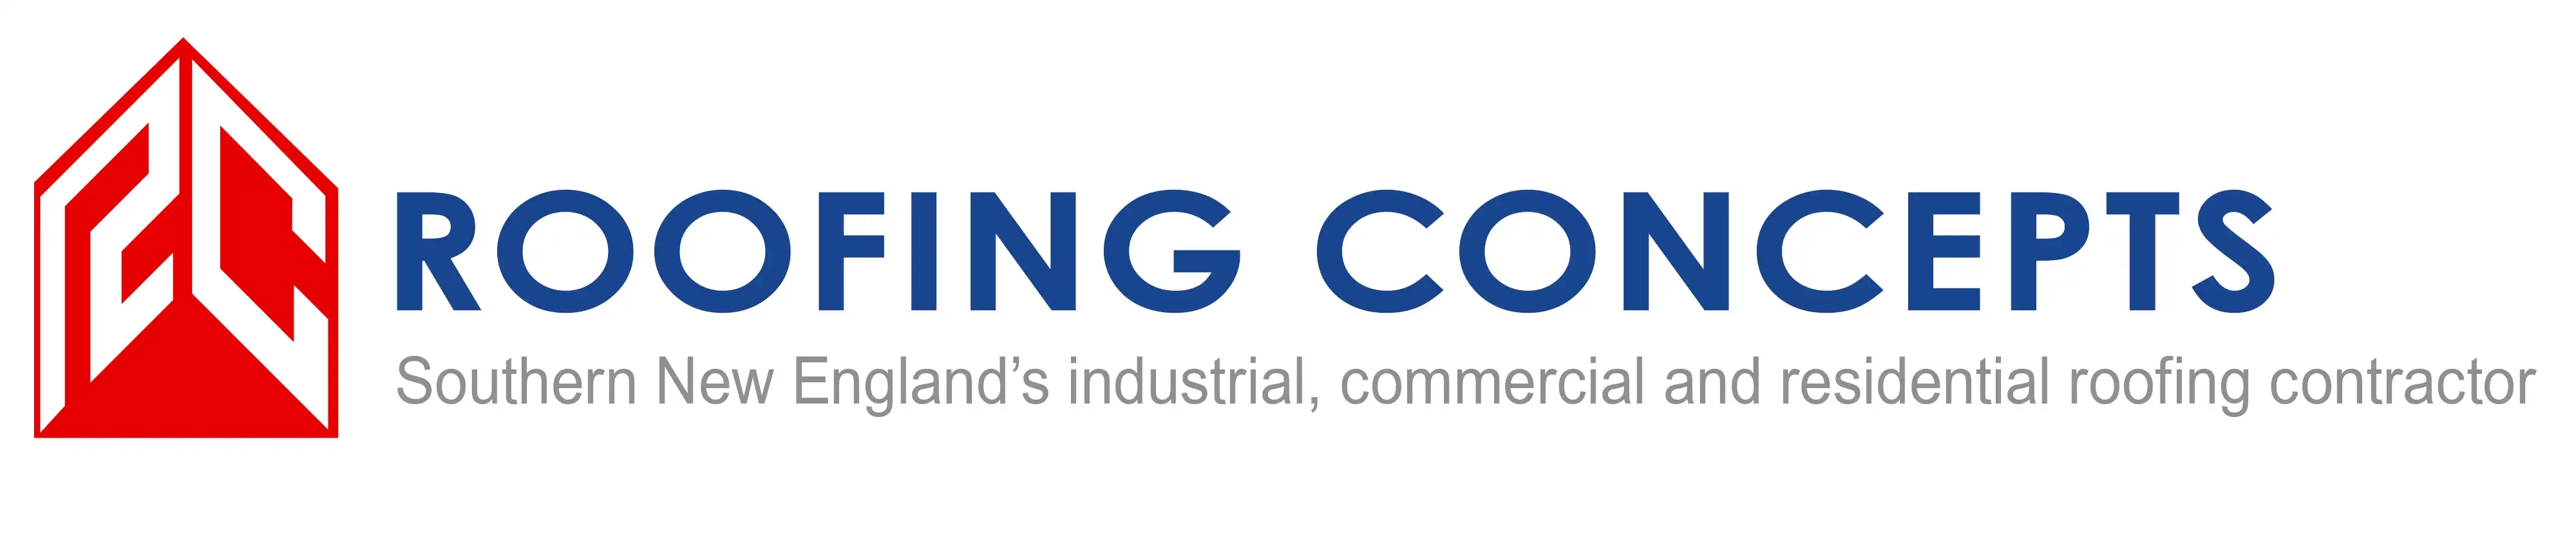 Roofing Concepts LLC Logo